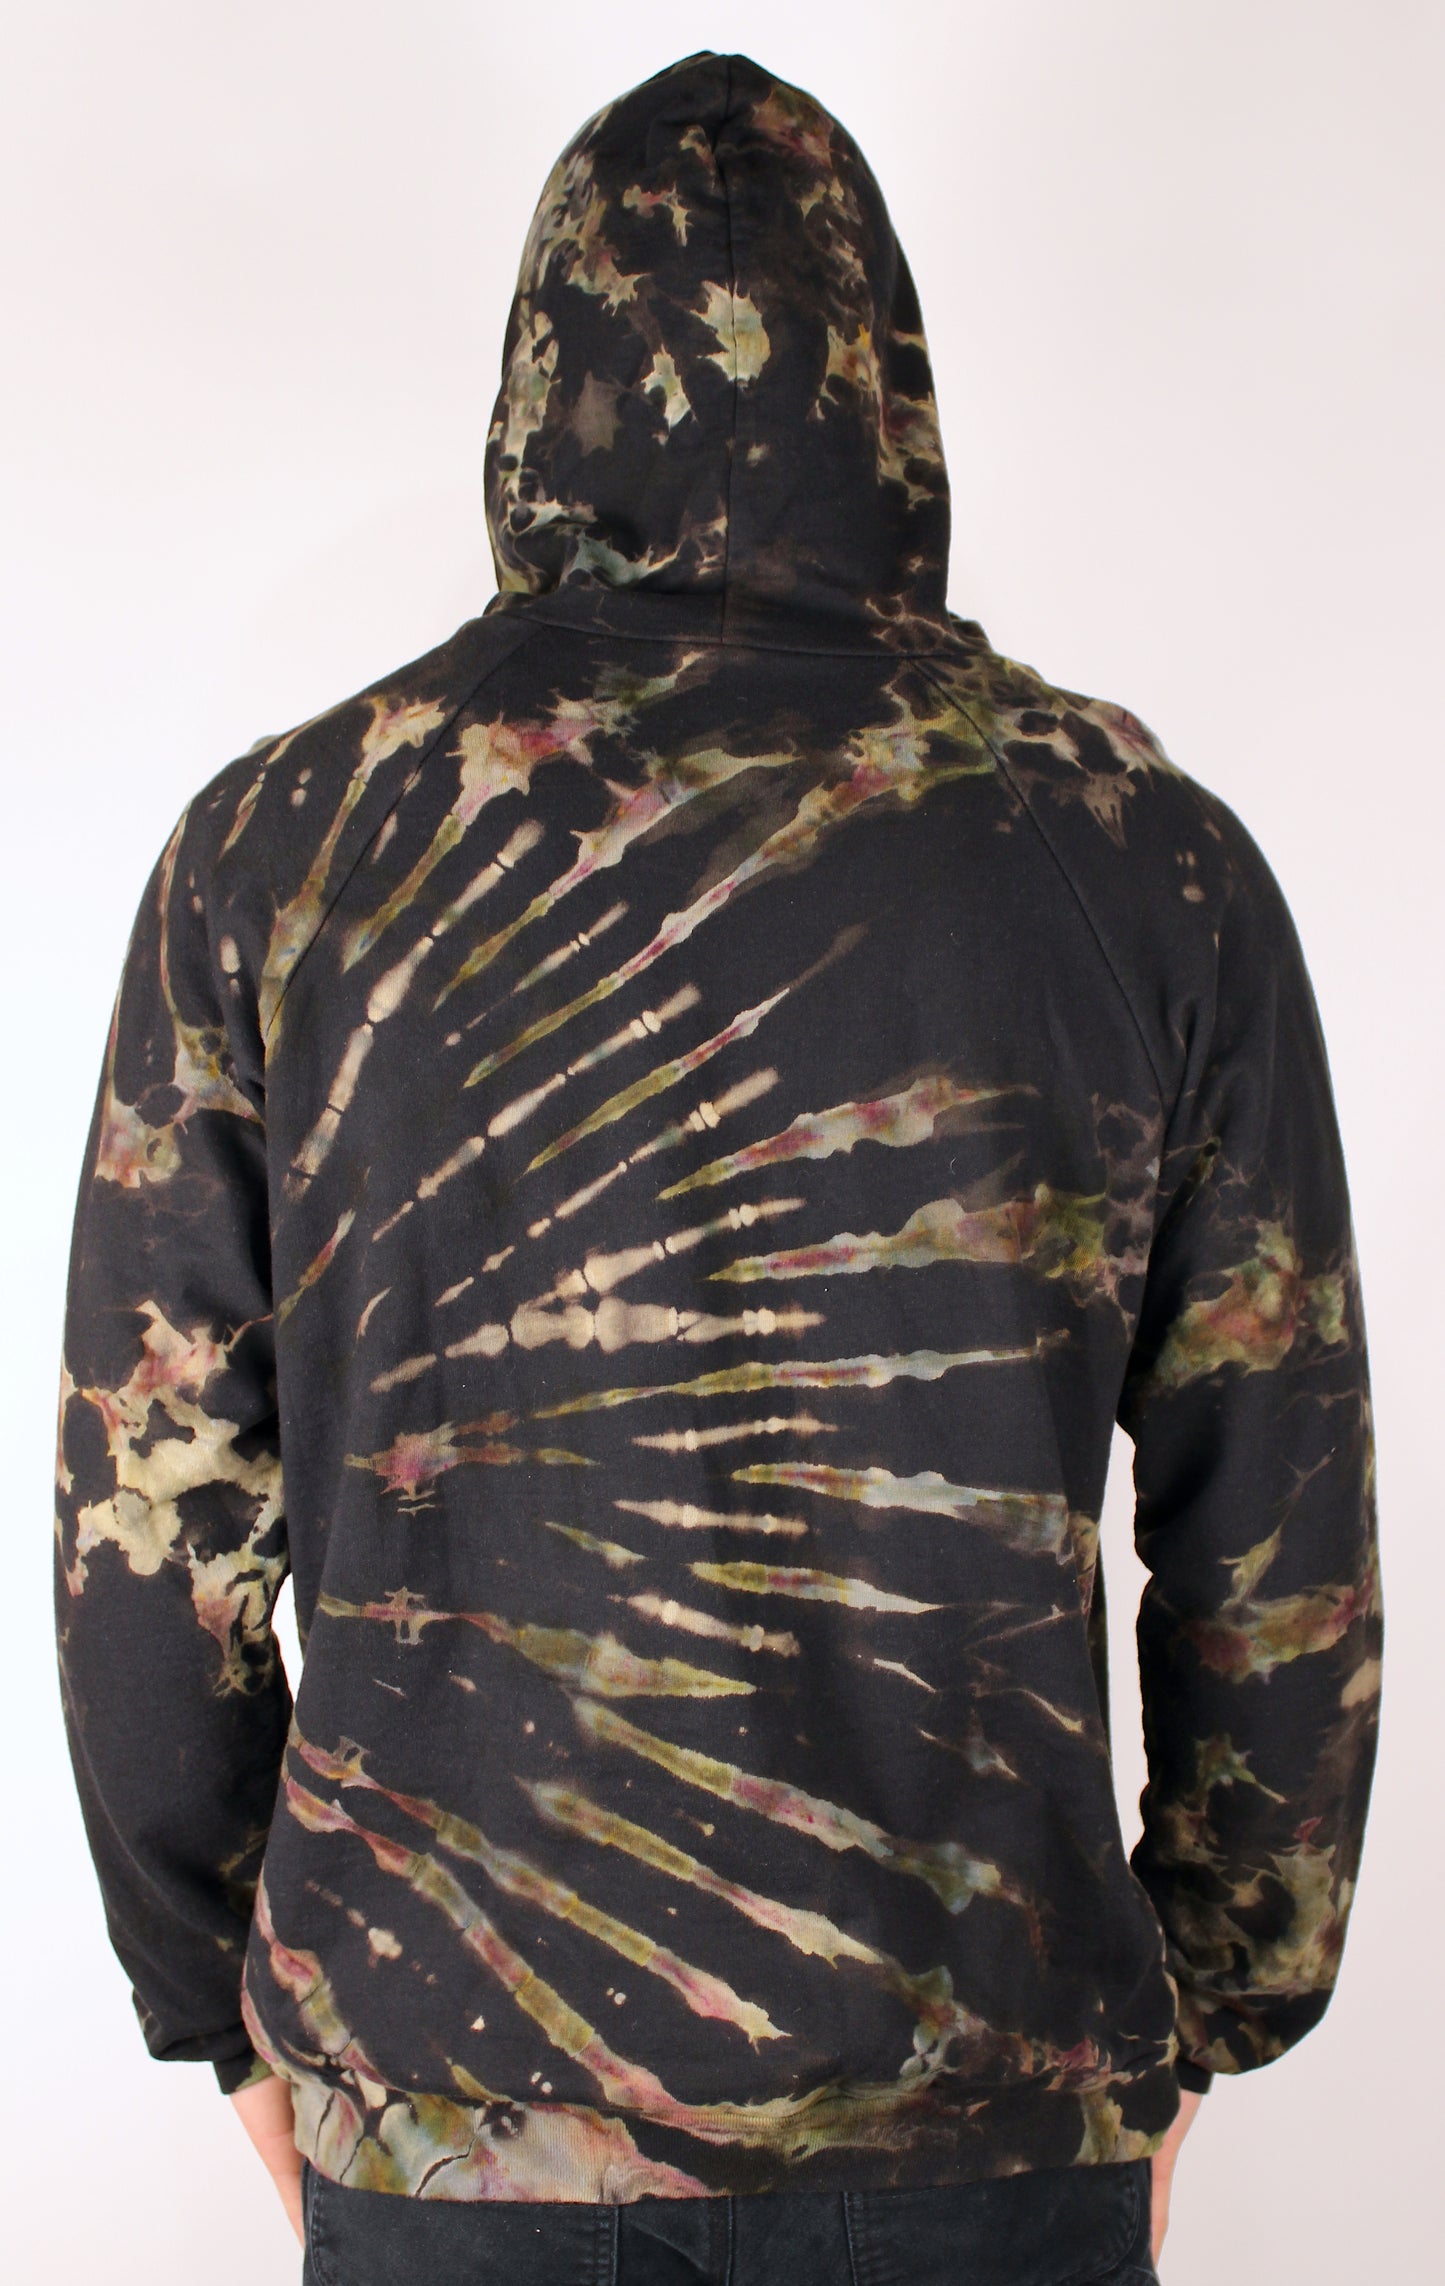 L - "Orb Spider" Pullover Reverse Dyed Hoodie